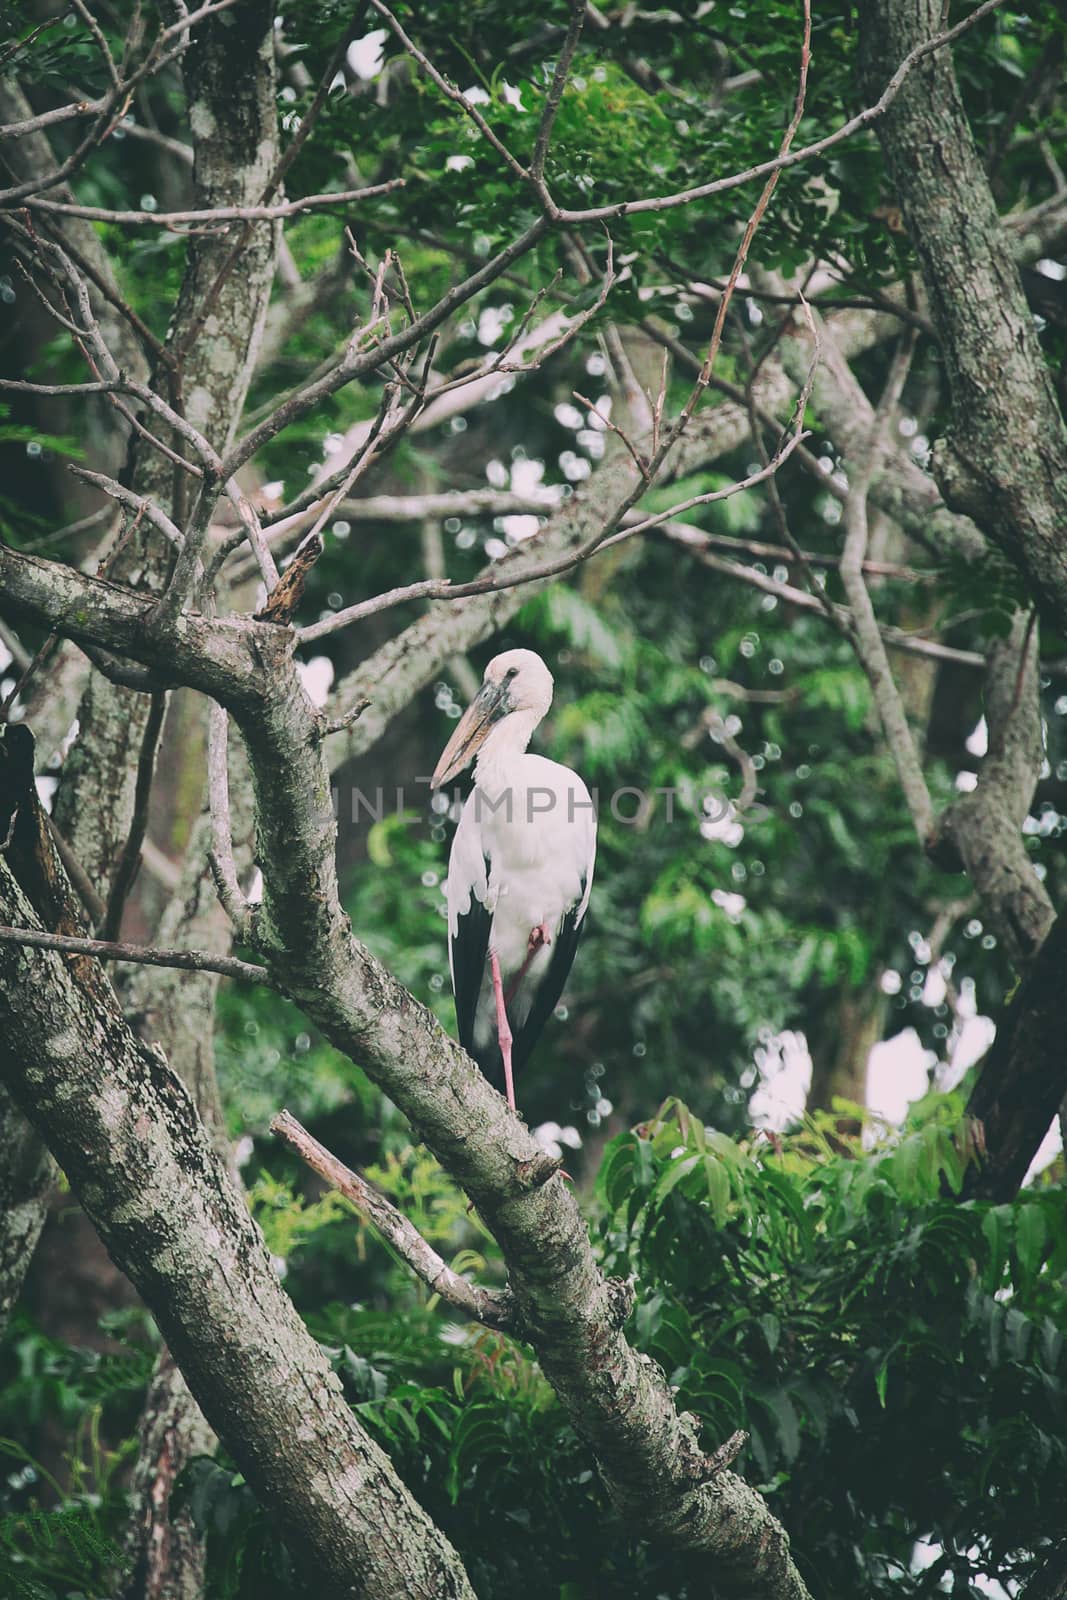 Image of stork perched on tree branch. - Vintage Filter by yod67